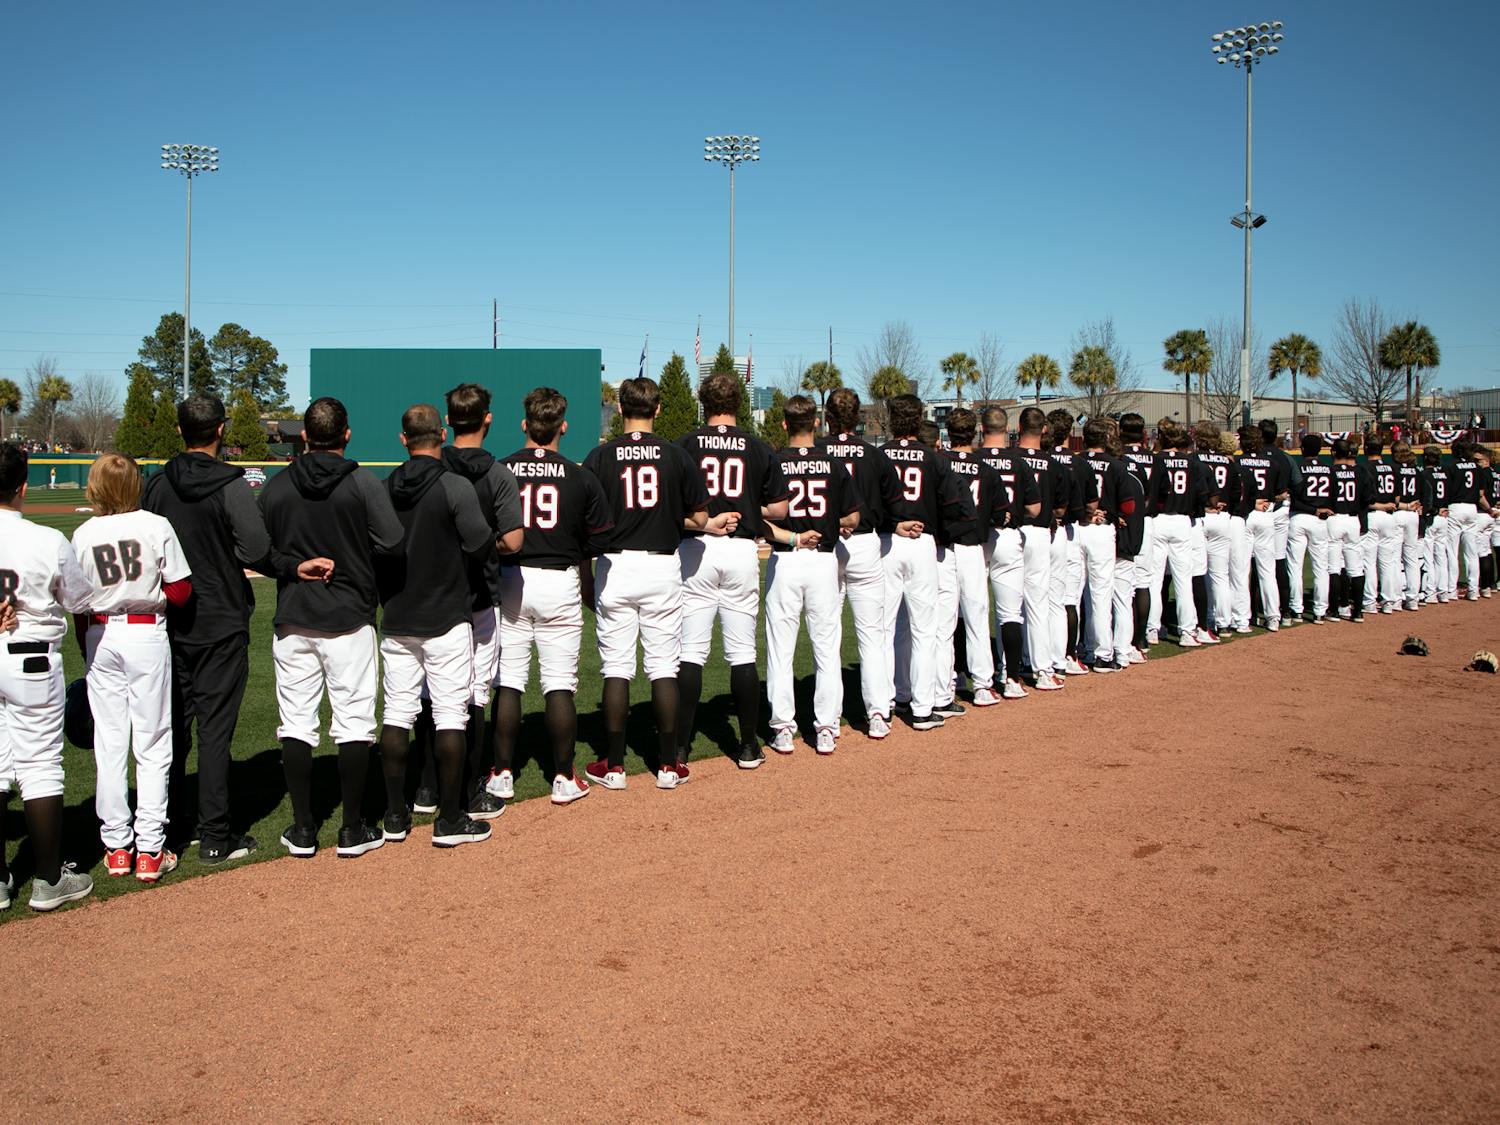 USC's baseball team stands for the singing of the National Anthem before playing the University of North Georgia on Feb. 20, 2022.